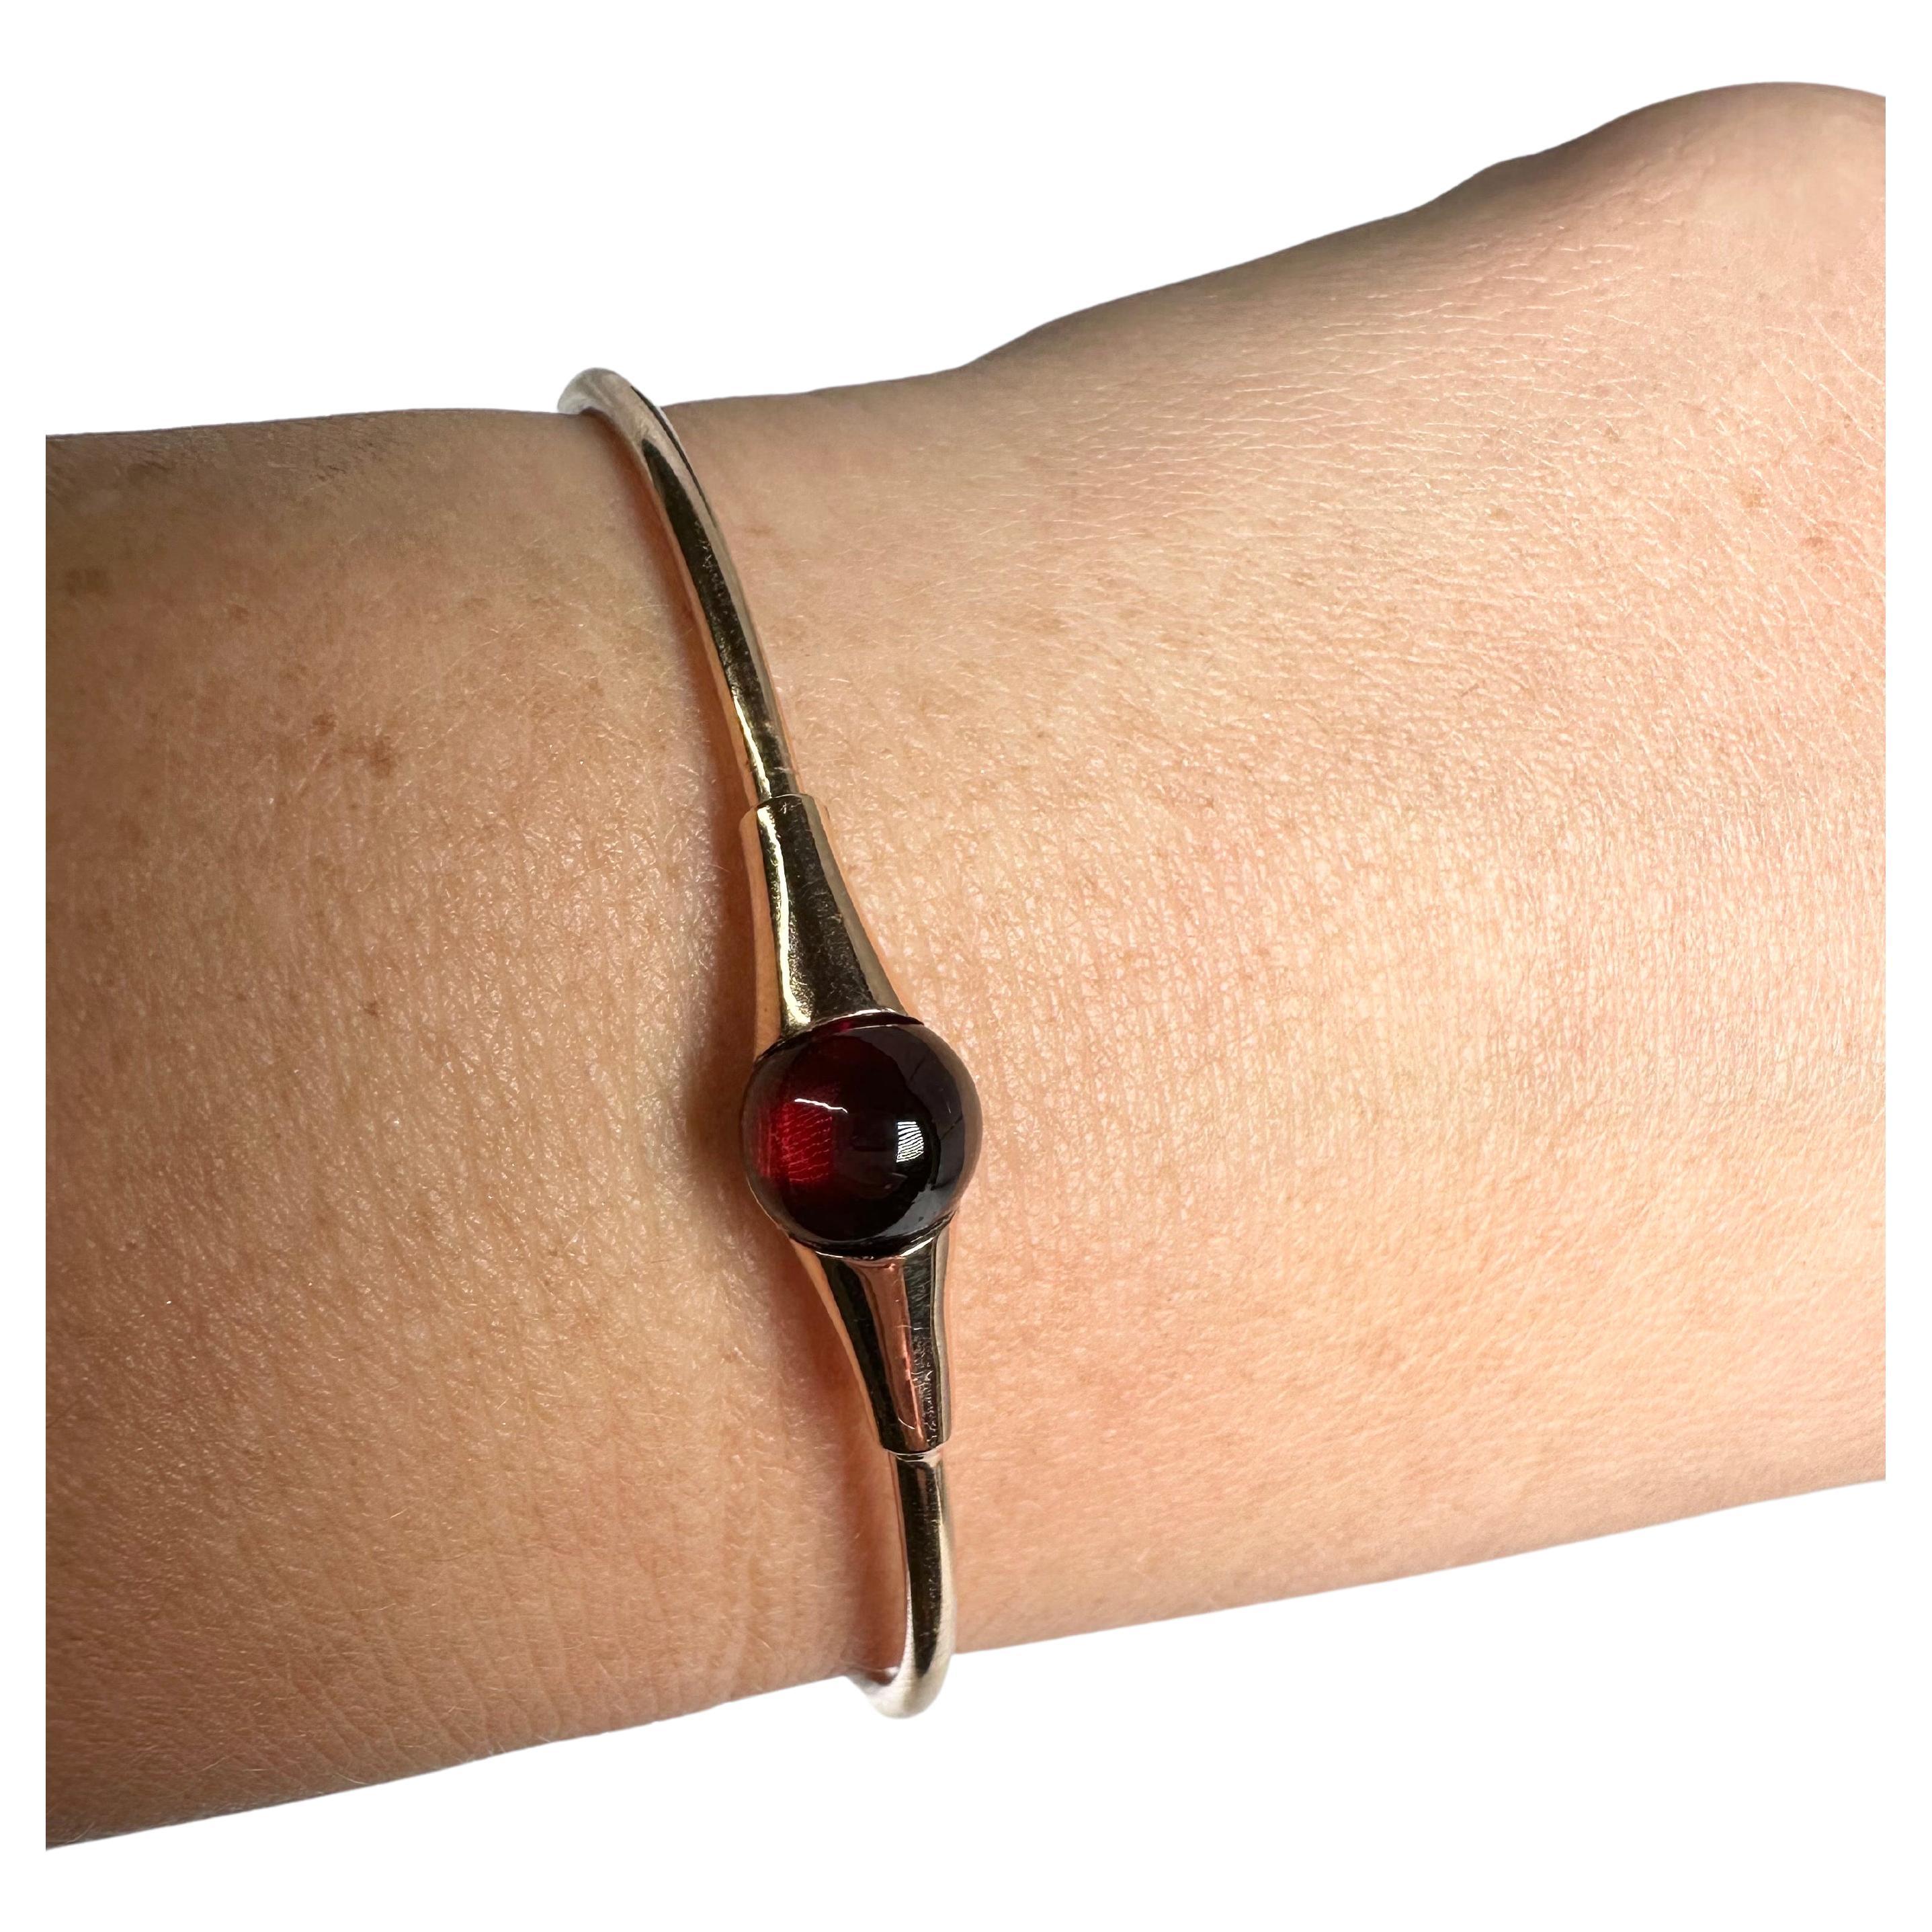 Amazingly rare garnet flexible bangle bracelet in 14KT gold, stunning red garnet in a unusual cabochon shape!

GOLD: 18KT rose gold
NATURAL GARNET(S)
Clarity/Color: Slightly Included/Red
Cut:Round Cabochon
Grams:6.46
Item 24000003kat

WHAT YOU GET